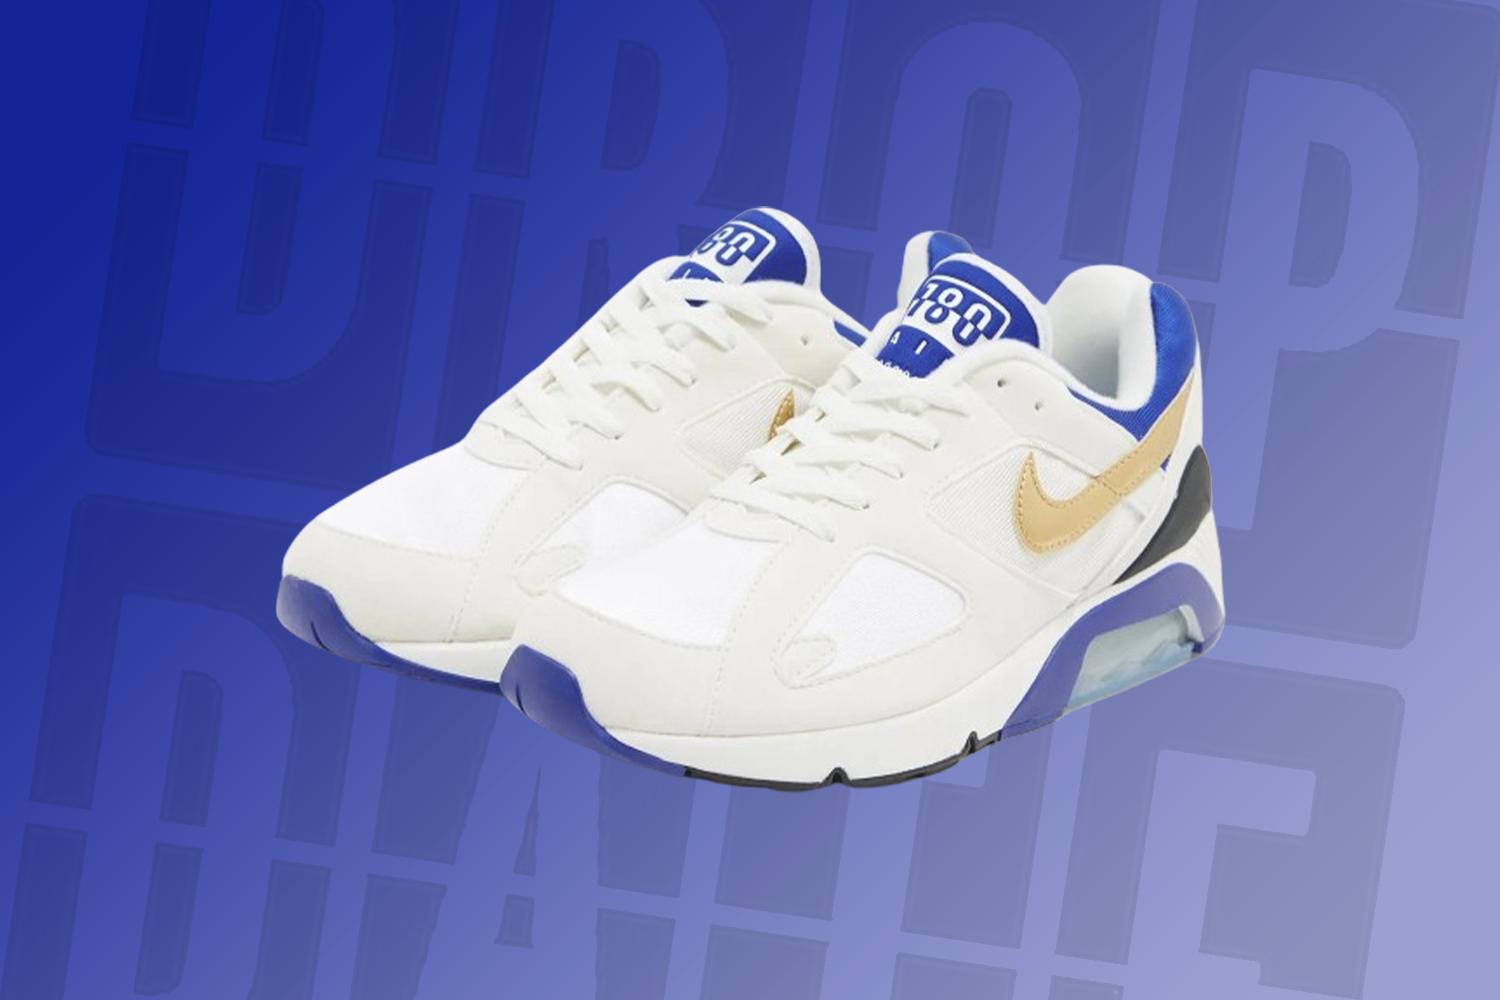 The Nike Air 180 ‘Concord’ is a Slice of Olympic Legacy